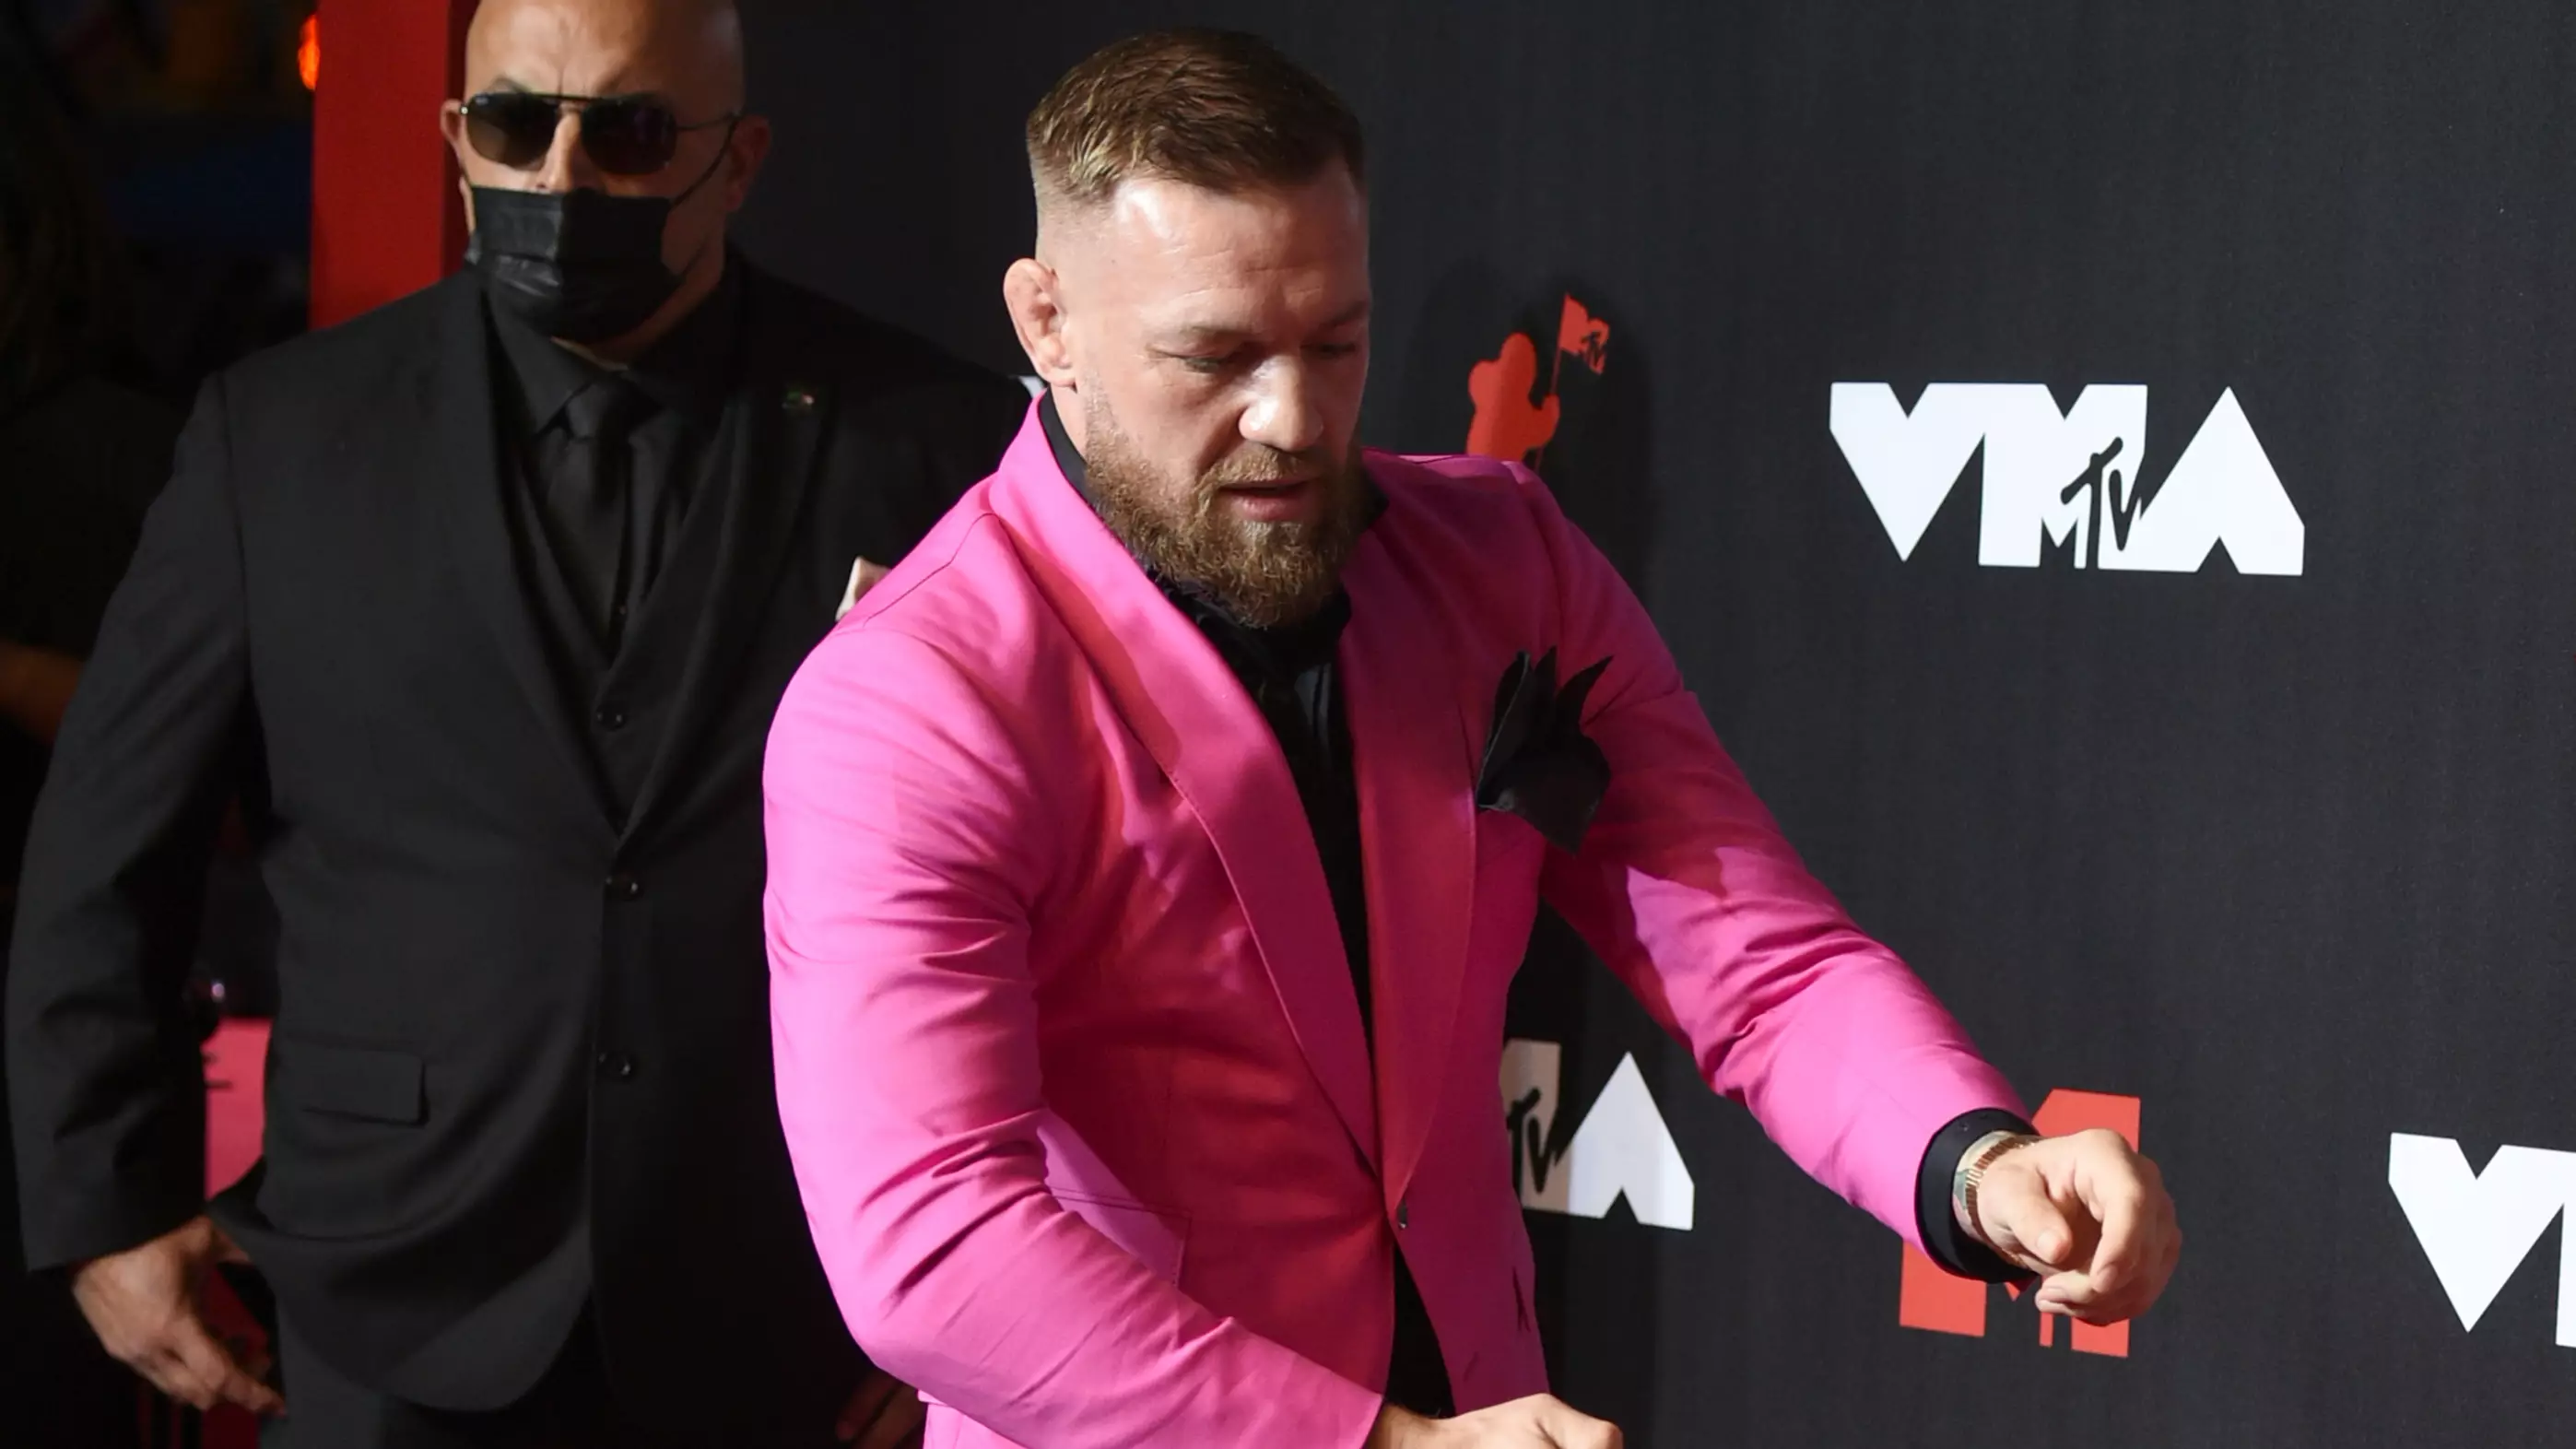 Machine Gun Kelly And Conor McGregor Nearly Get Into A Fight On VMA Red Carpet